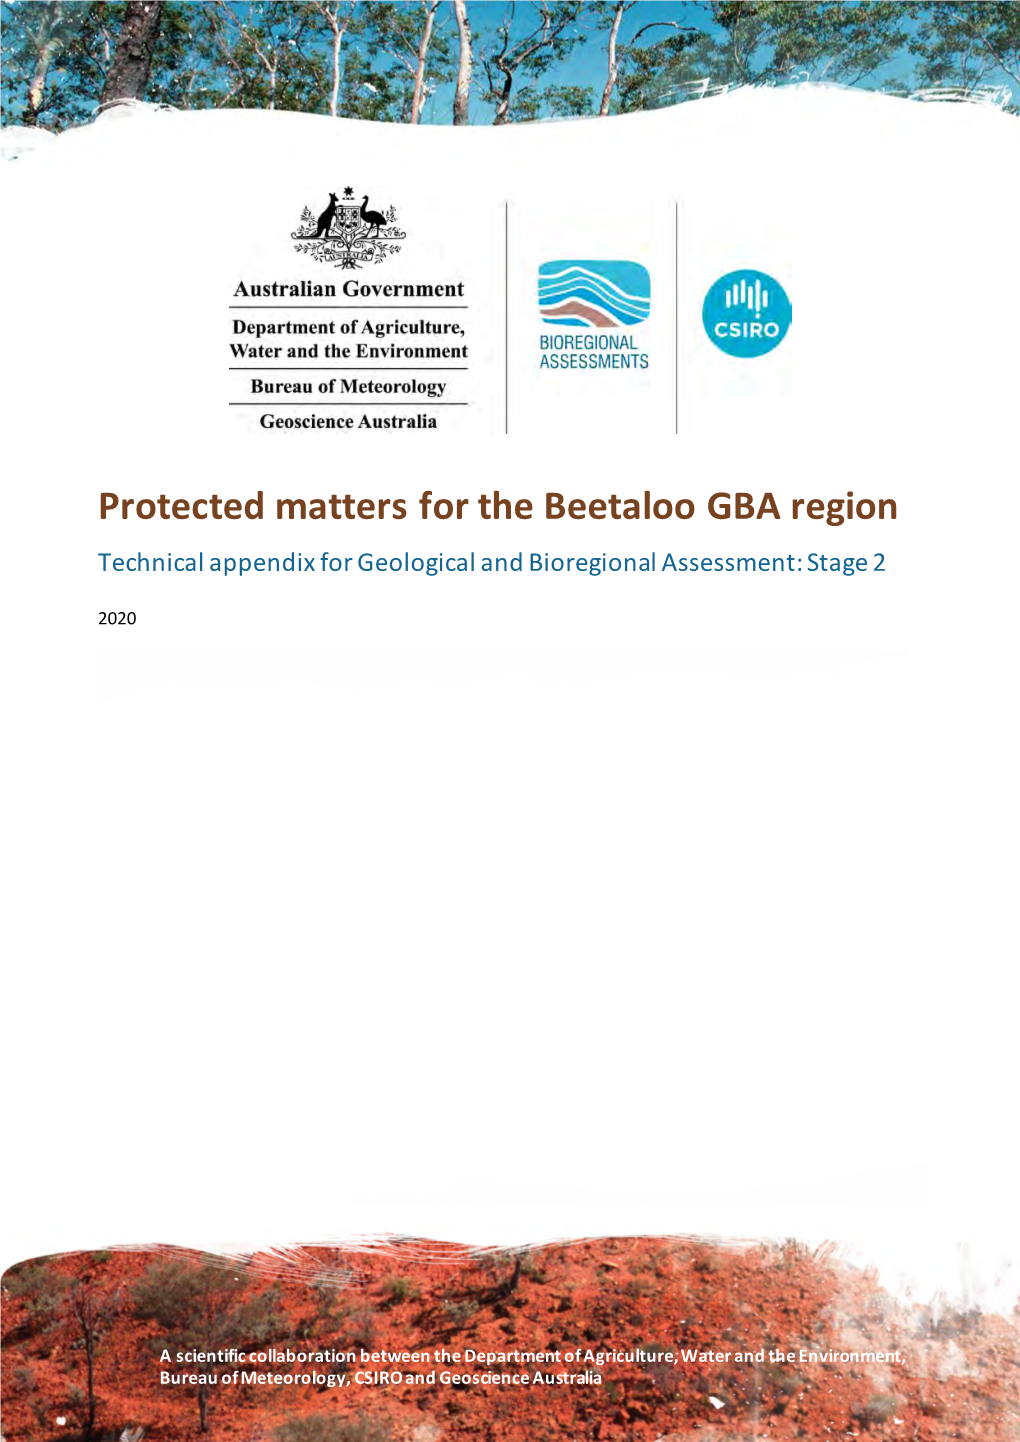 Protected Matters for the Beetaloo GBA Region Technical Appendix for Geological and Bioregional Assessment: Stage 2